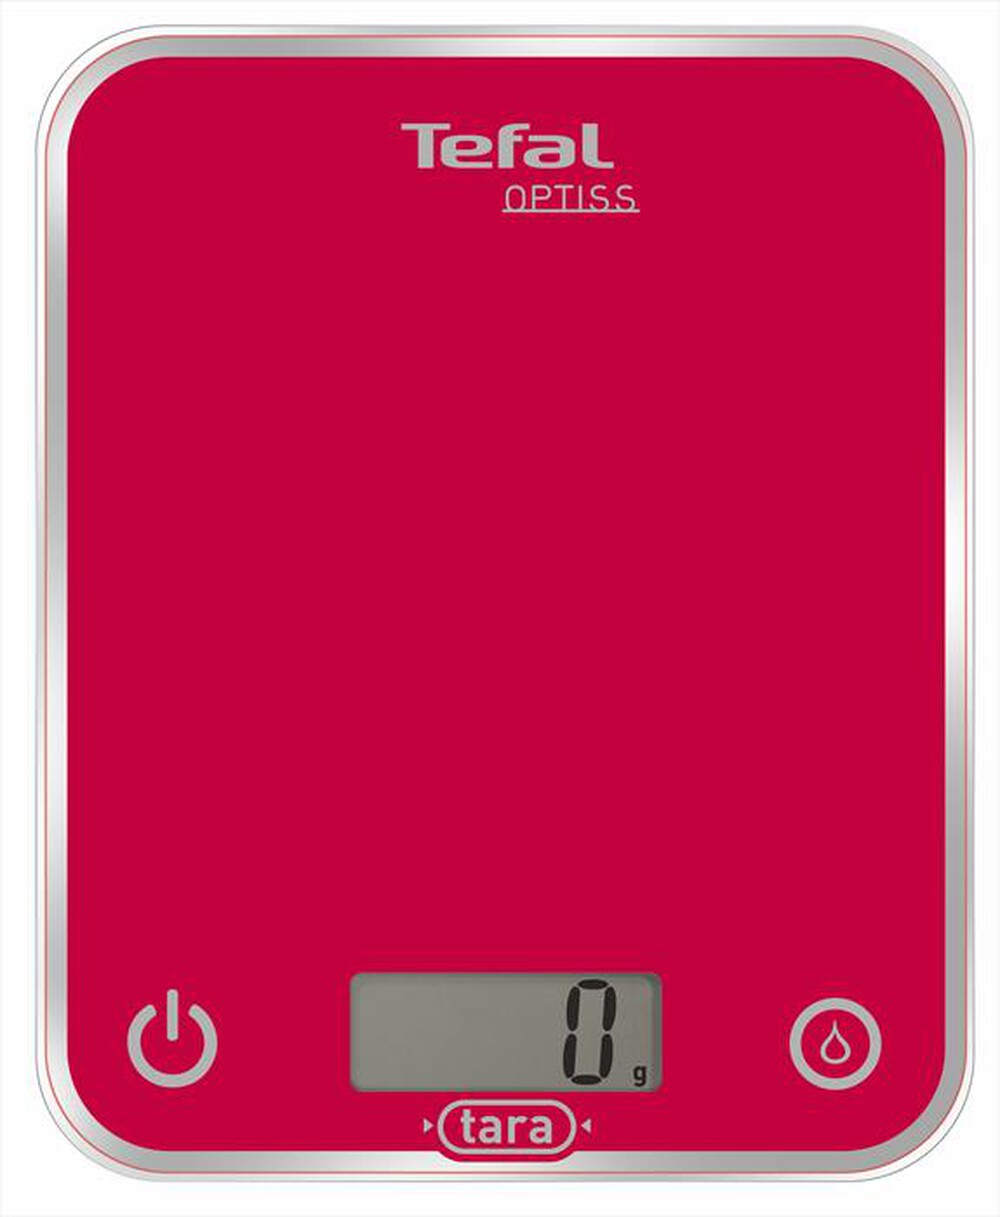 "TEFAL - BC5003 Optiss Glass - ROSSO"